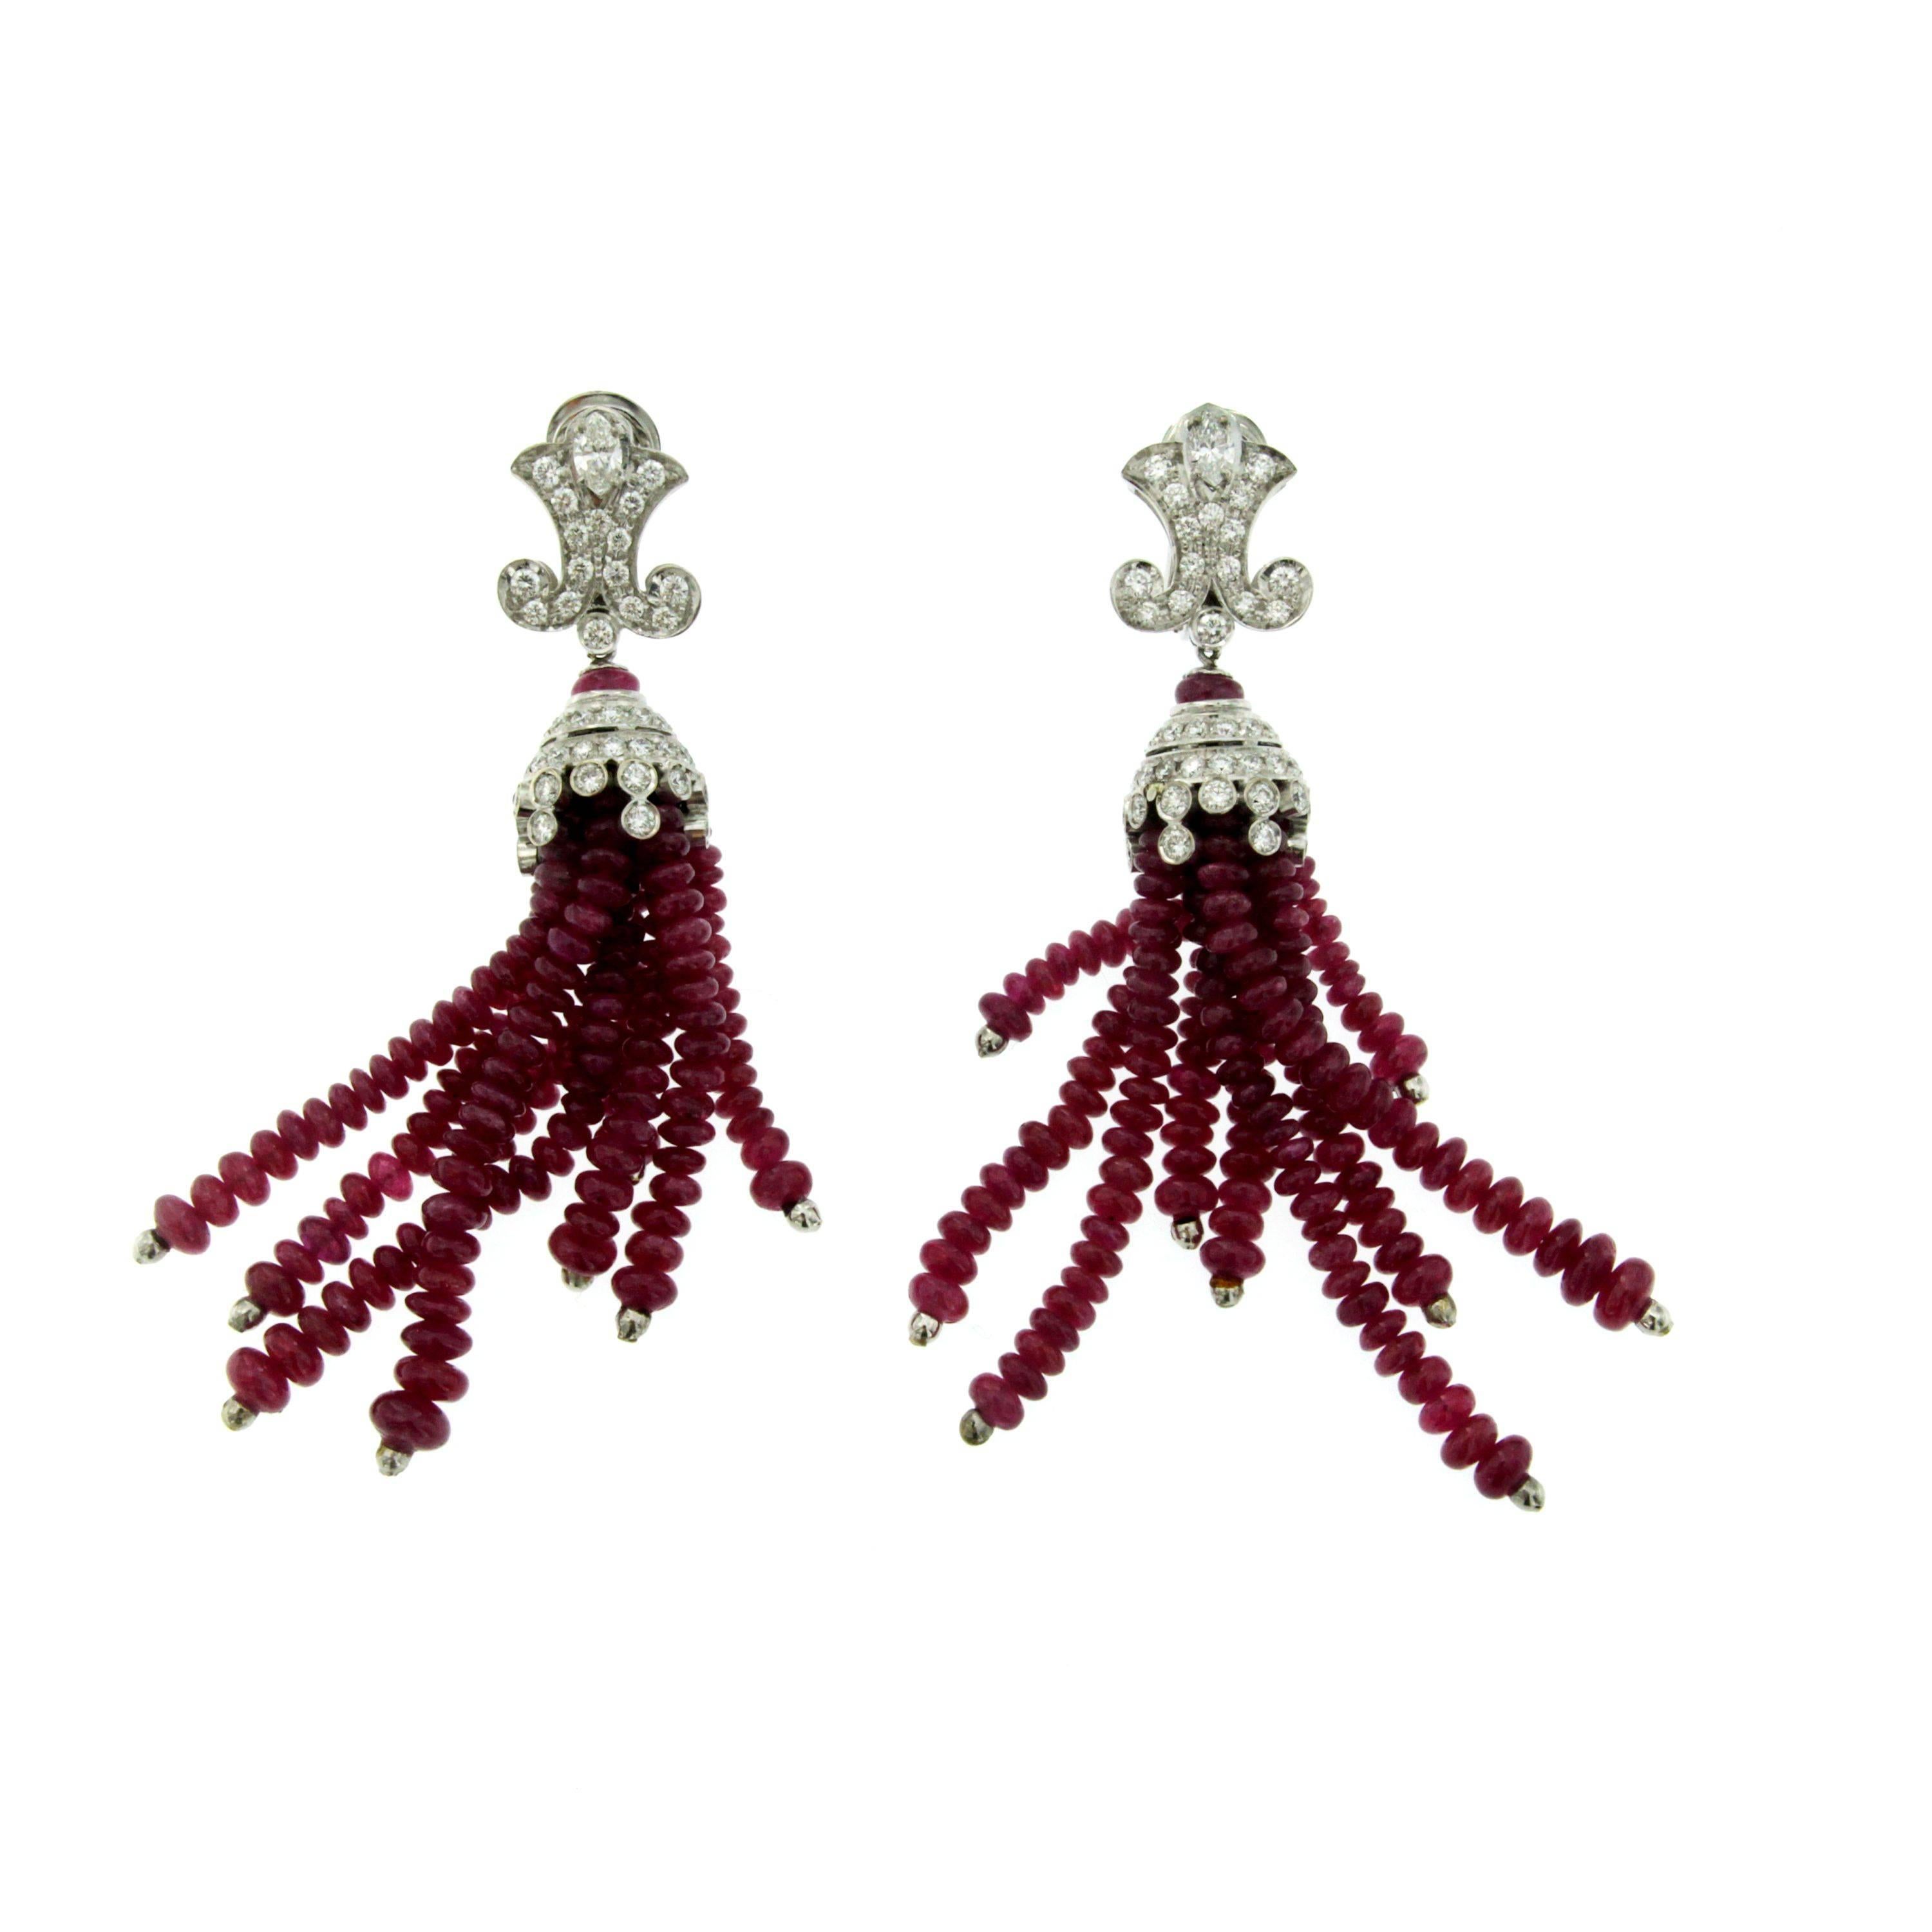 This wonderful pair of earrings feature 90 carats of Rubies and 3.60 cts of round brilliant cut diamonds G color IF clarity. Contemporary

CONDITION: Brand new
METAL: 18k Gold 
STONE: Ruby 90 total carats - Diamond 3.60 total carats
MEASURES: height